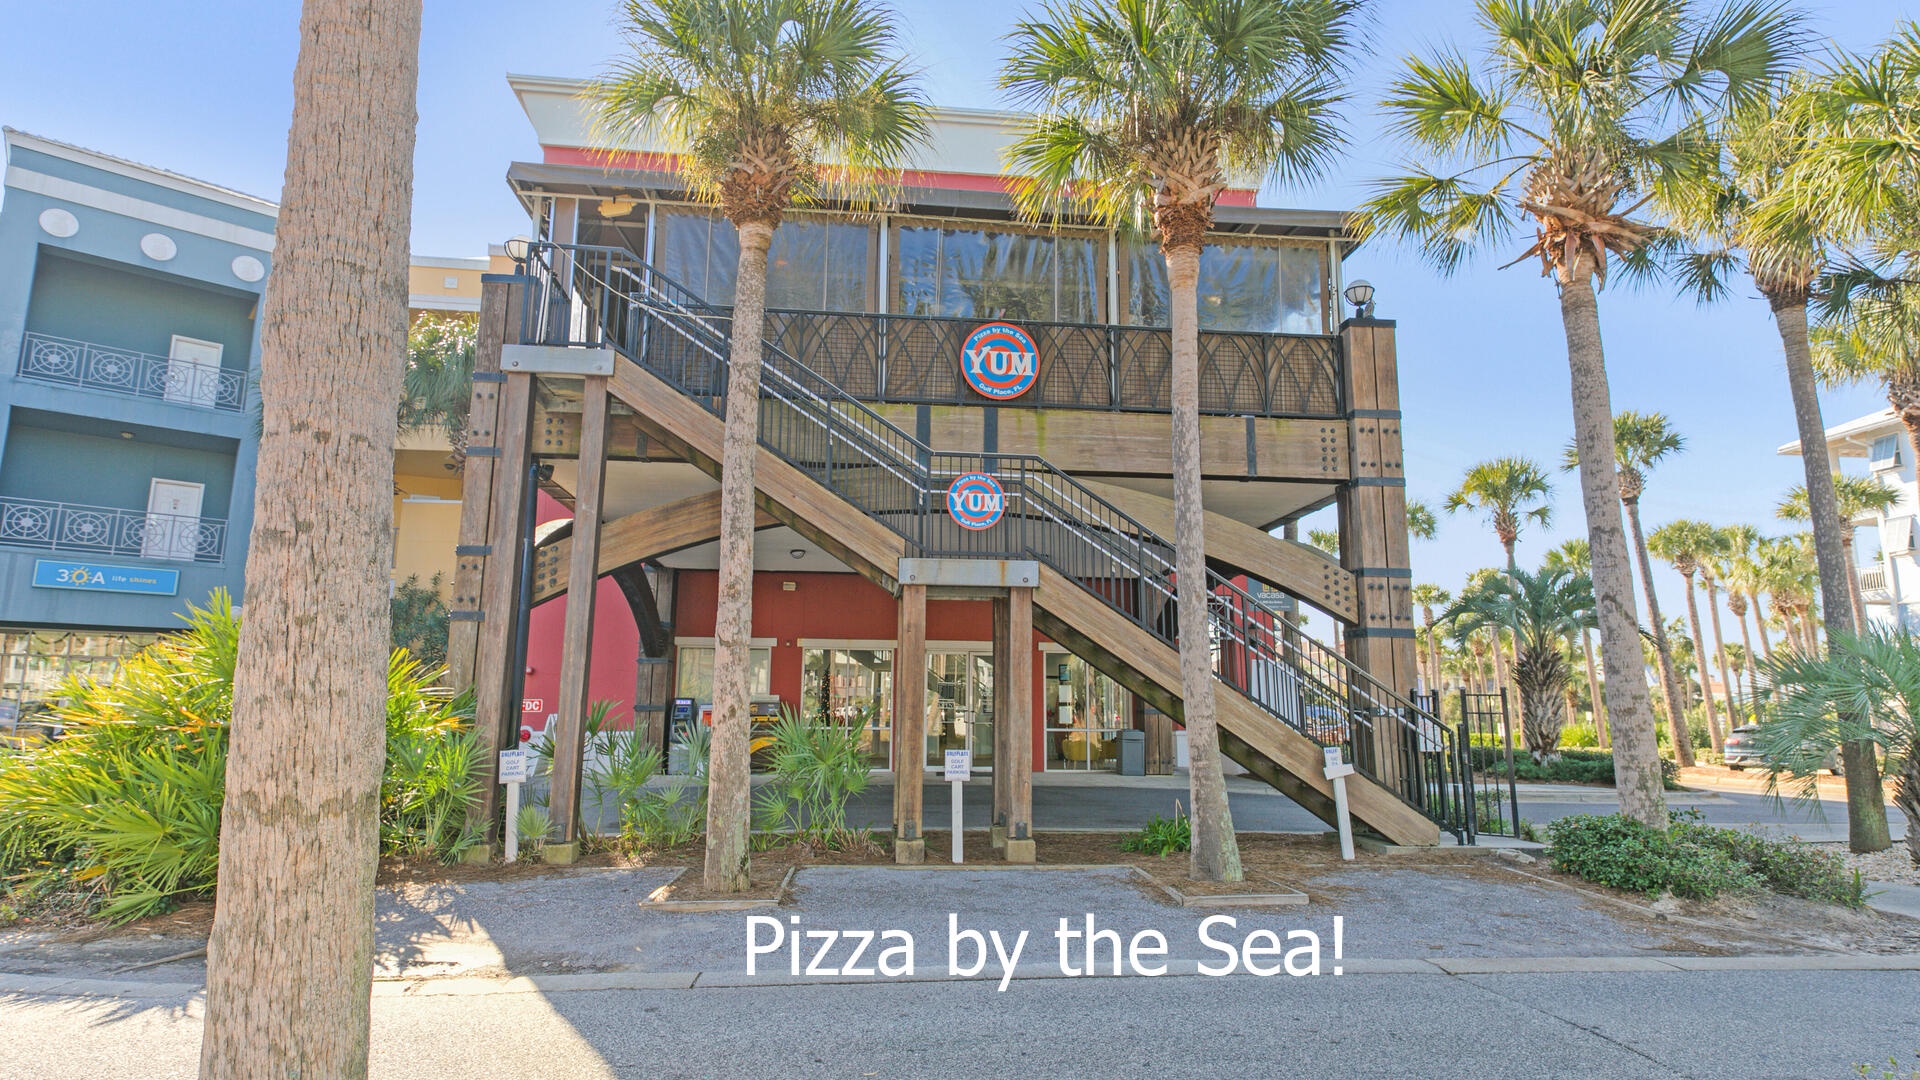 Shopping, dining, activities and more at nearby Gulf Place!